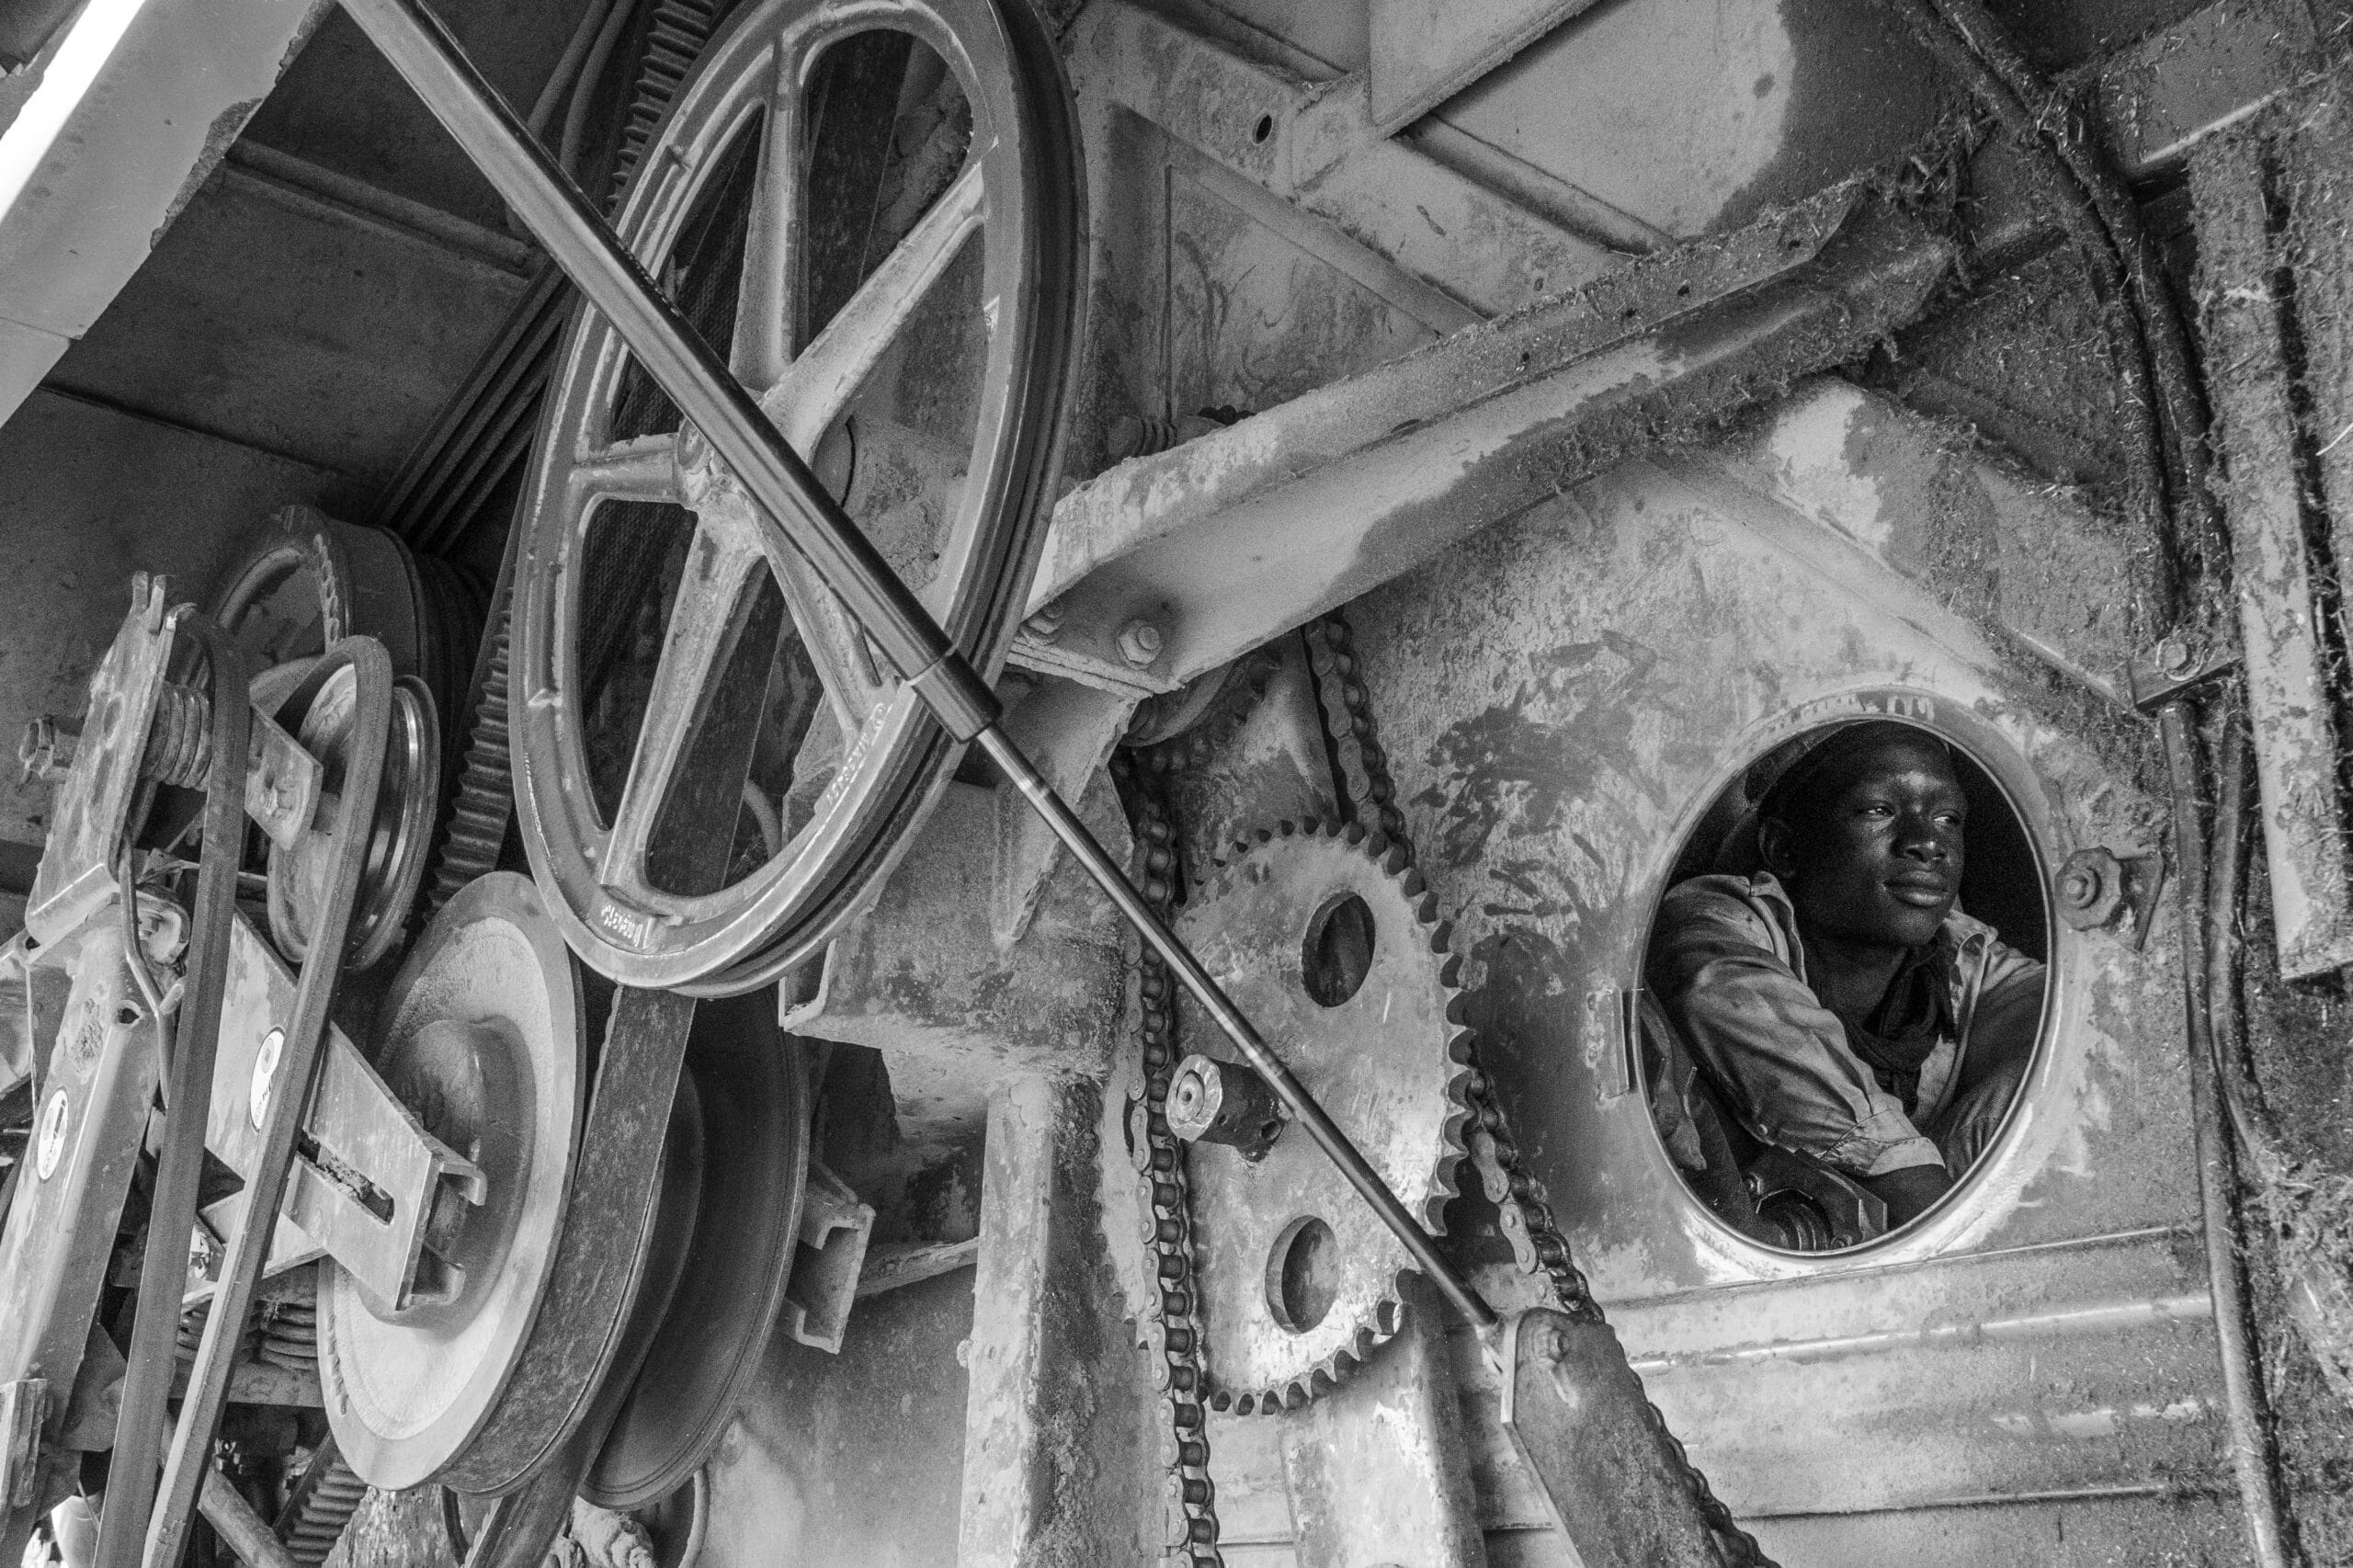 A black and white image of a man inside some machinery 